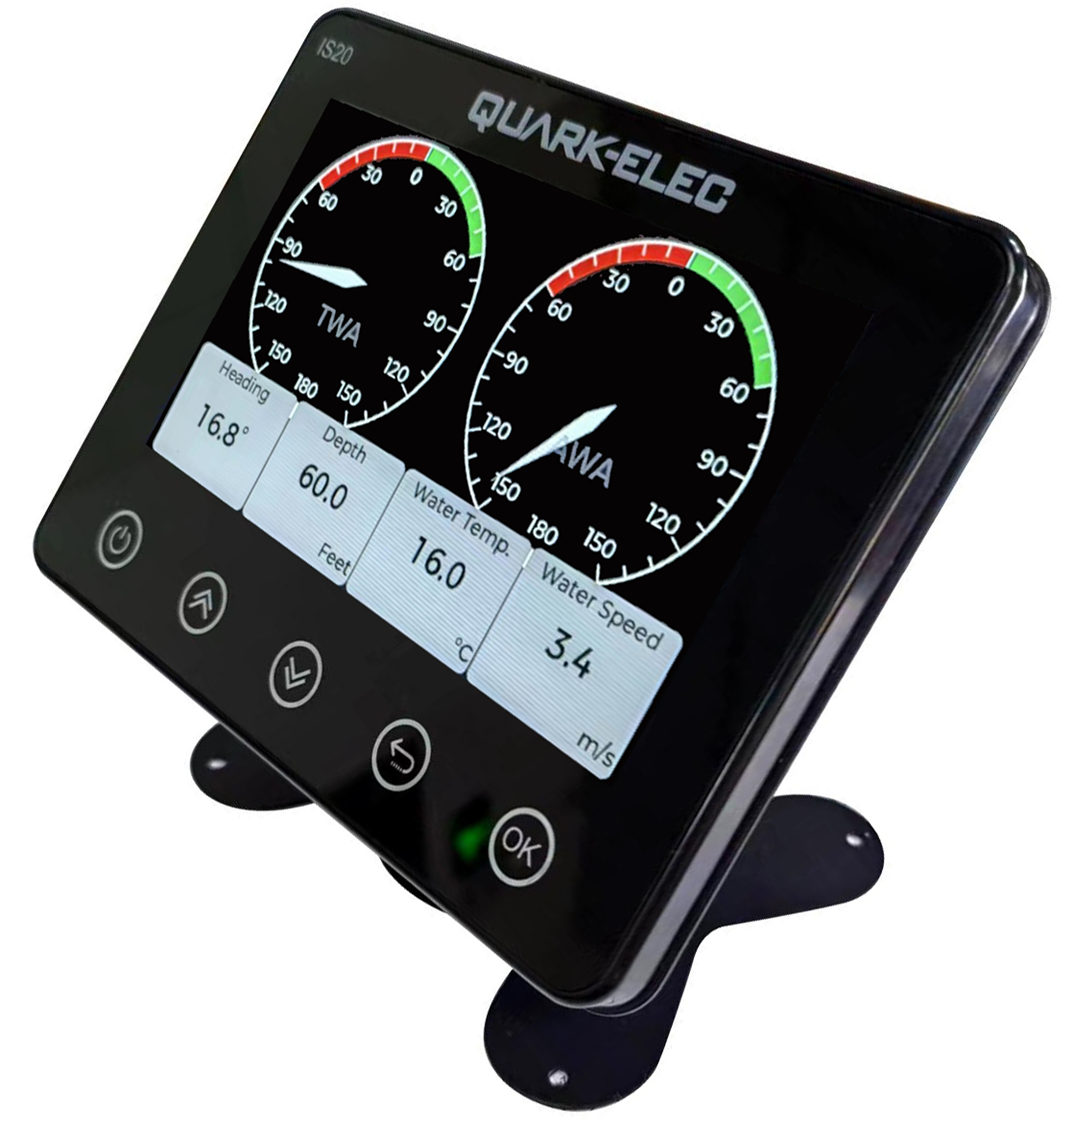 Quark-Elec IS20 Networked Multifunction Instrument The IS20 offers a range of features designed to enhance your marine experience with engine monitoring capabilities.